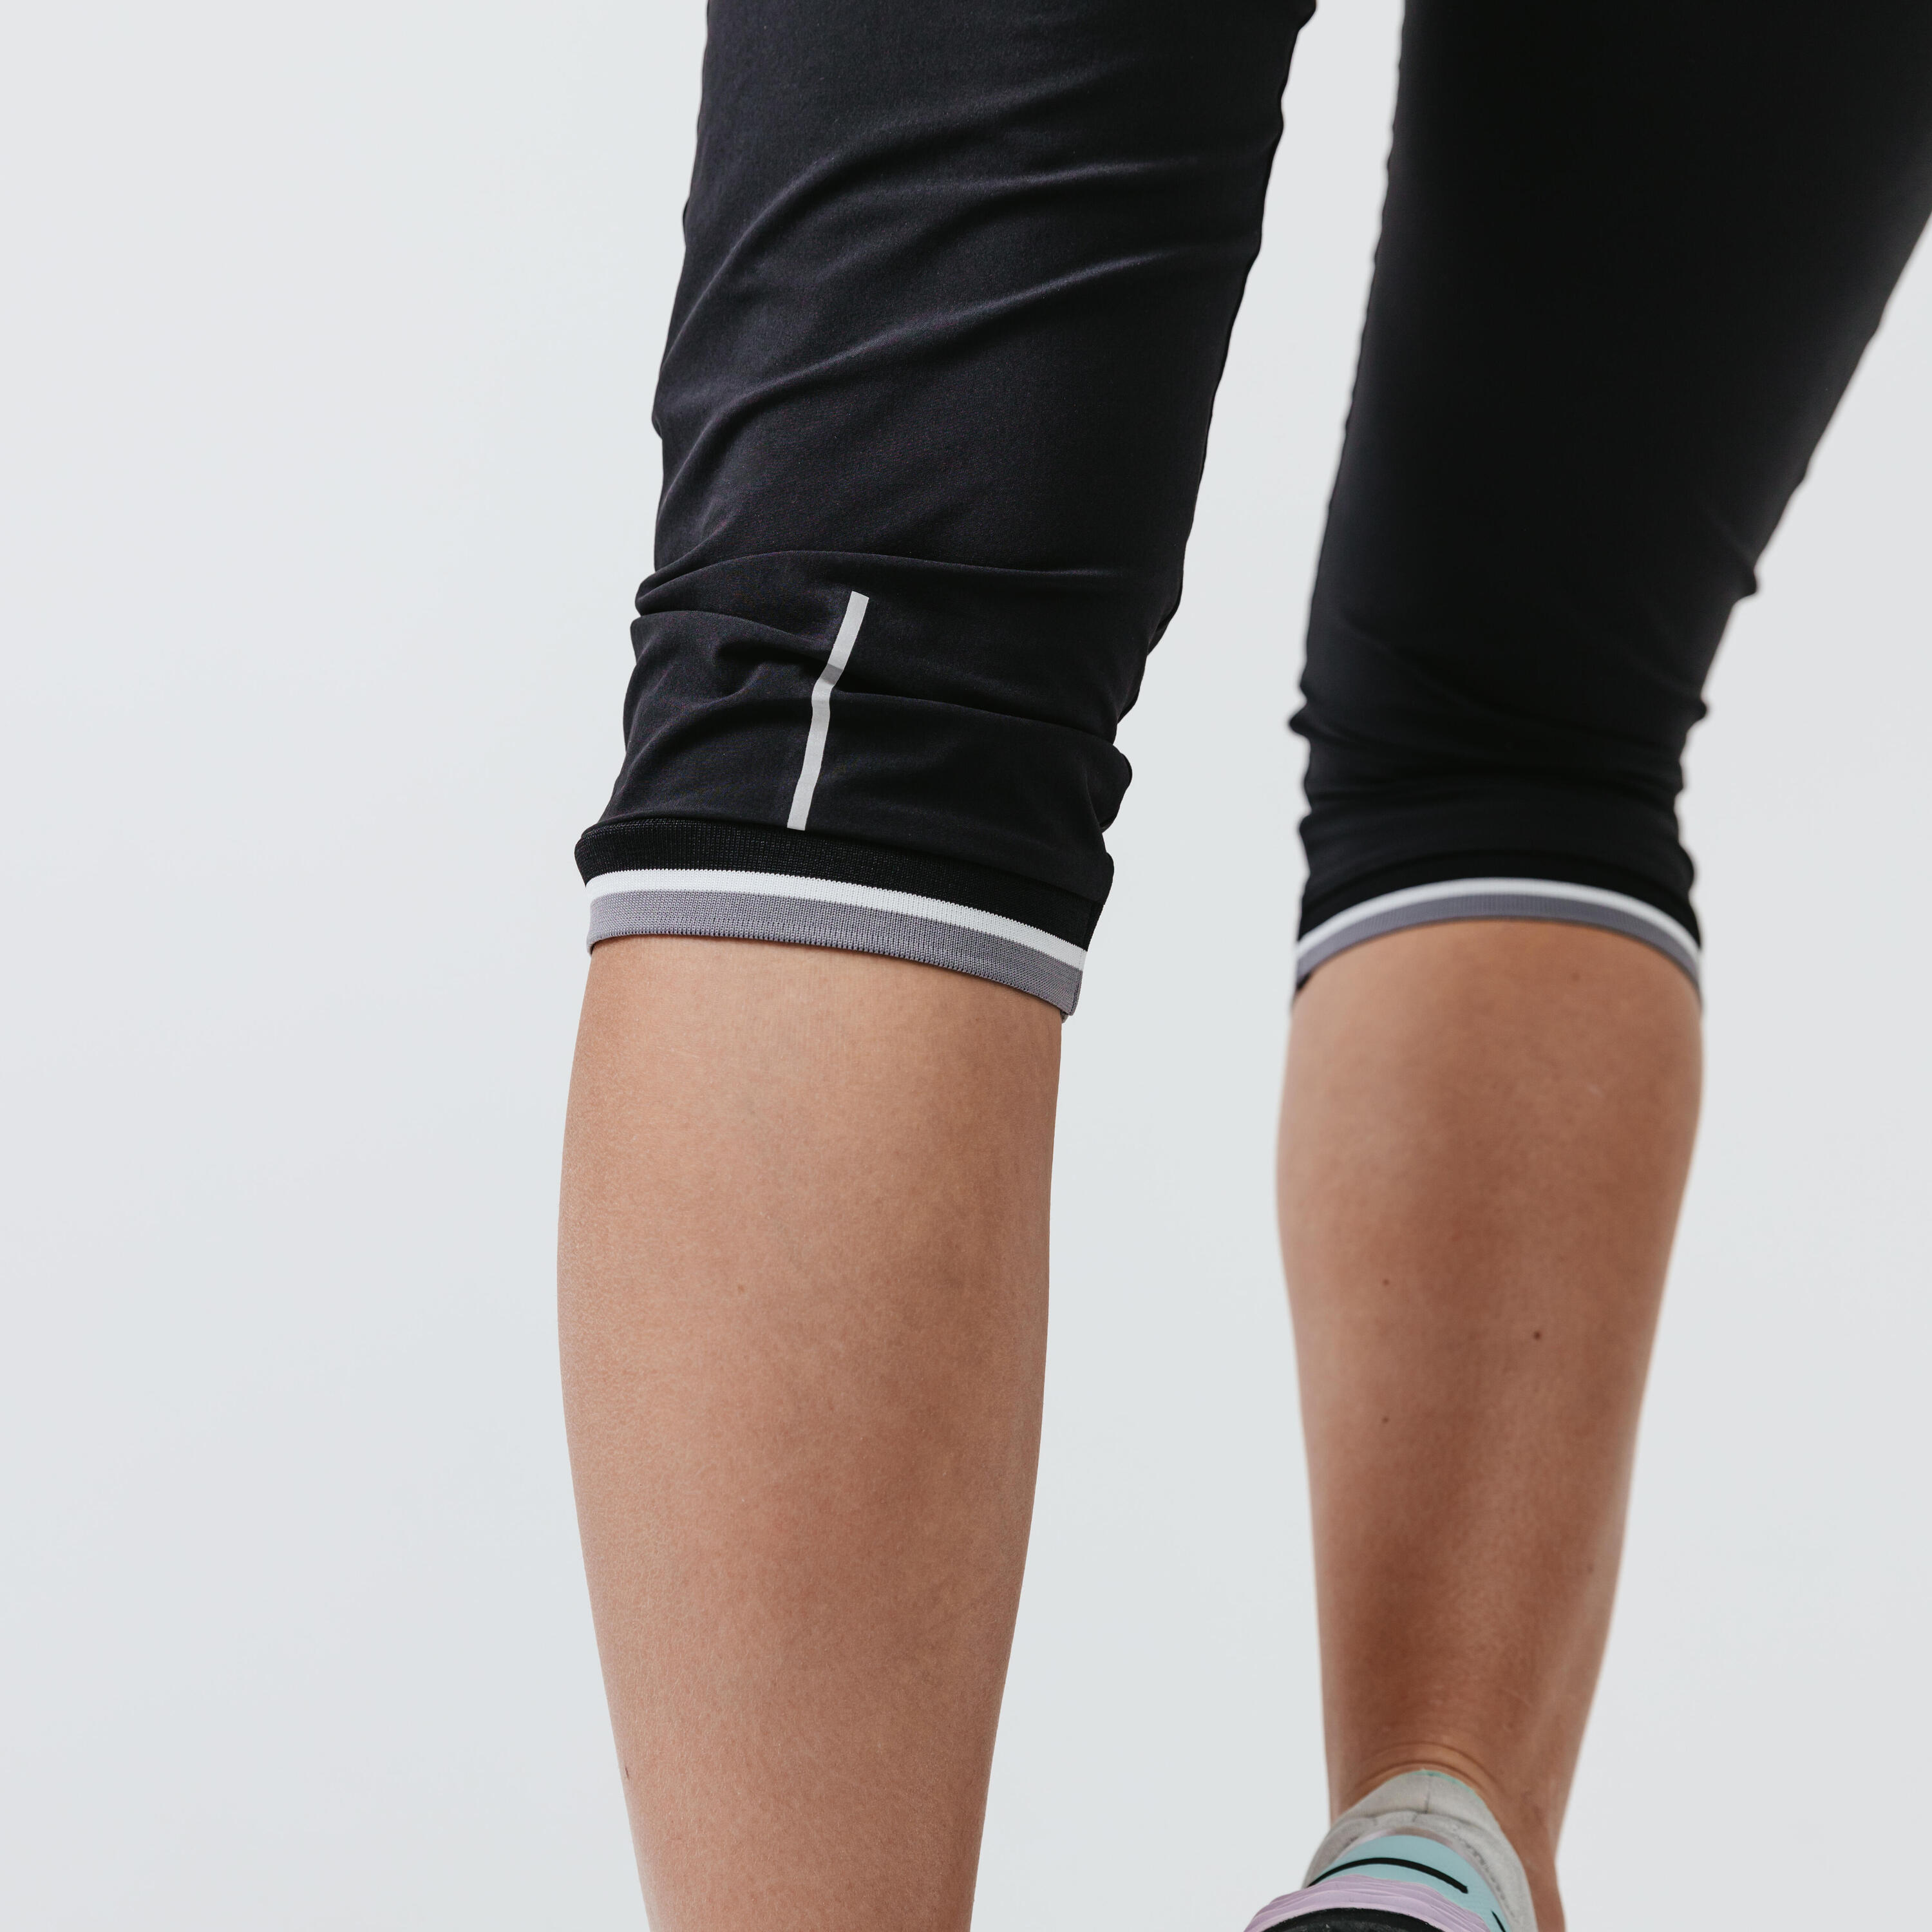 Women's cropped running trousers Dry - black 6/10